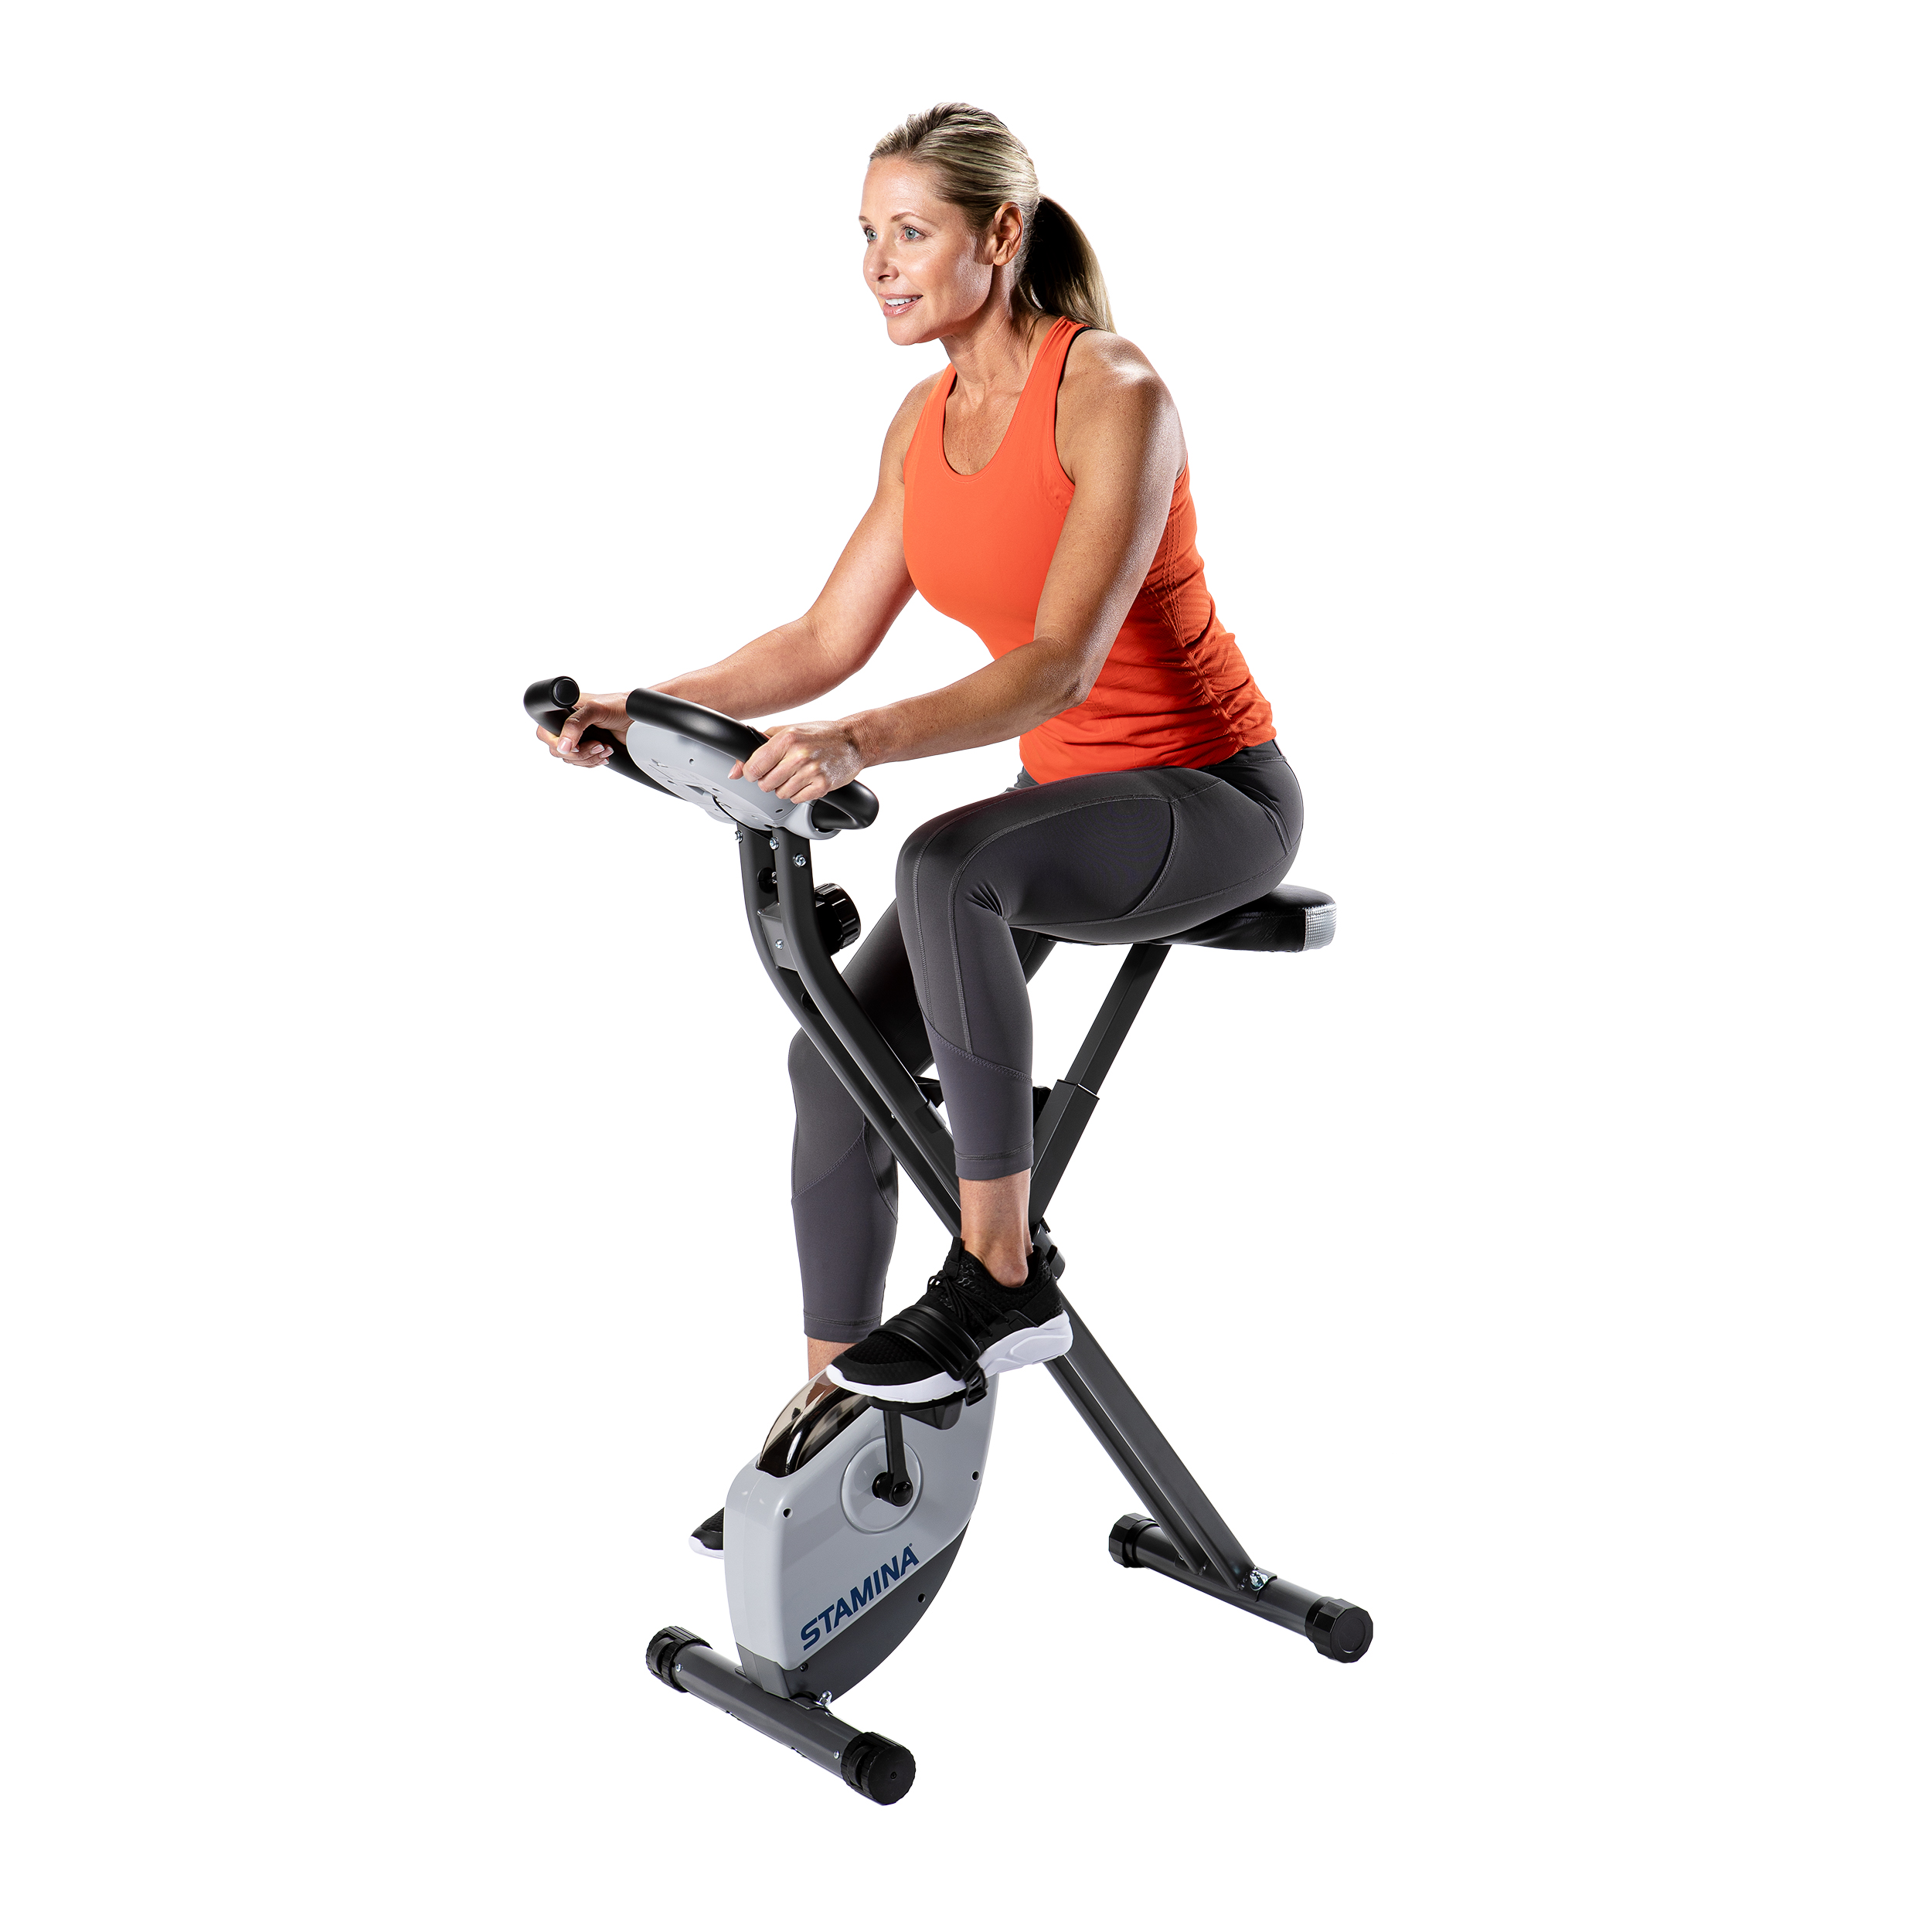 Stamina Folding Cardio Upright Exercise Bike with Heart Rate Sensors and Extra Wide Padded Seat - image 4 of 8